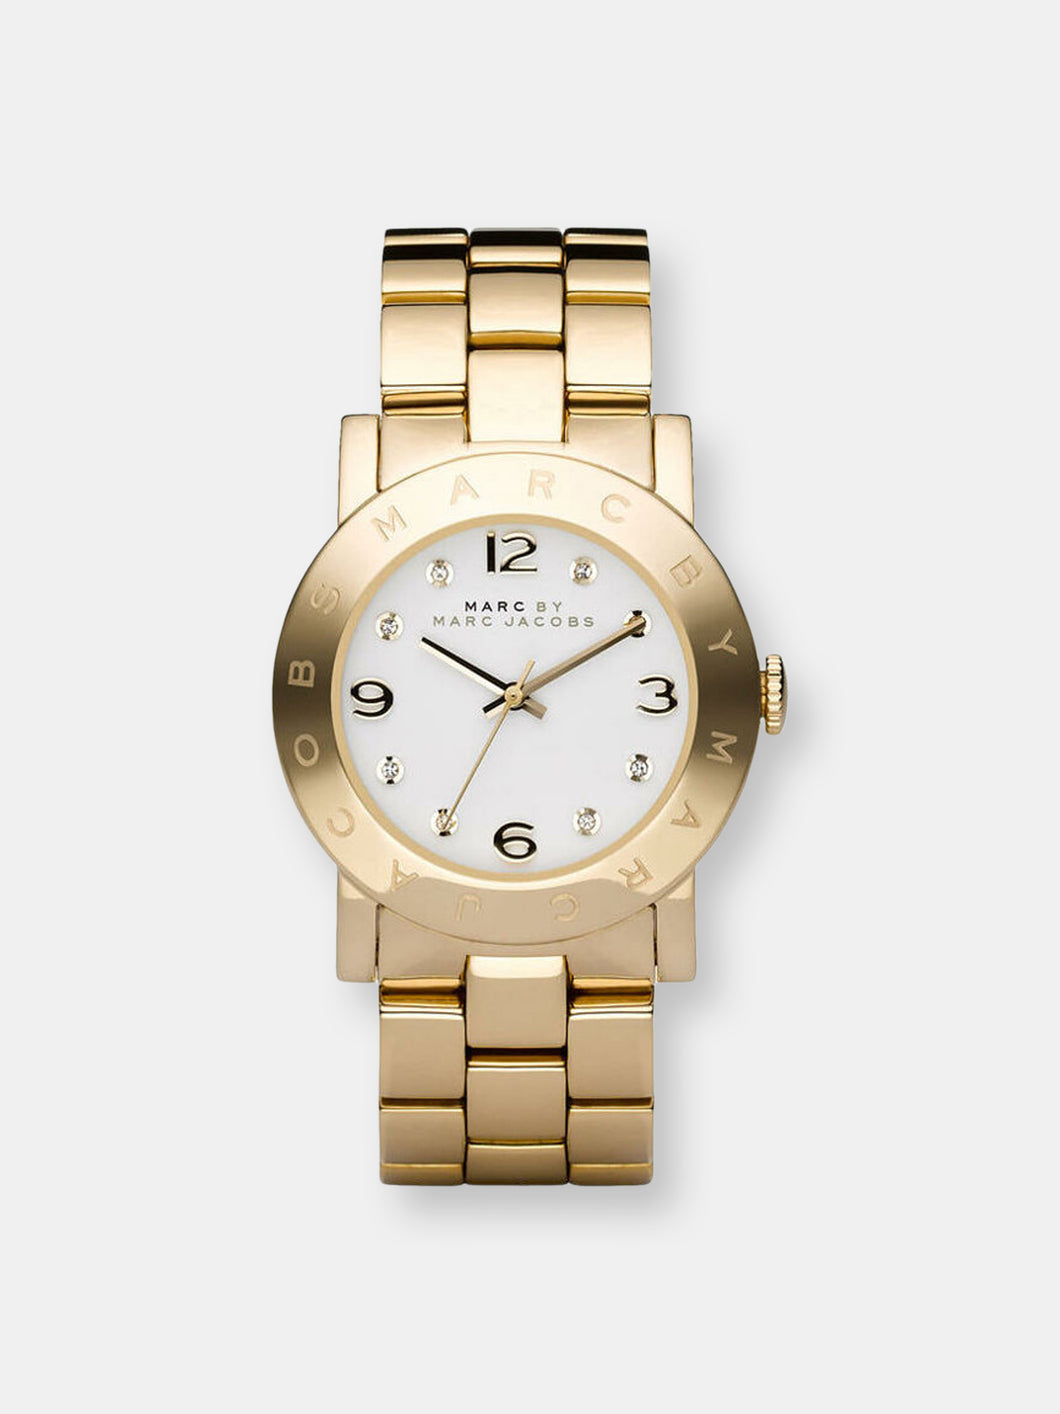 Marc by Jacobs Women's MBM3056 Gold Stainless-Steel Quartz Fashion Watch